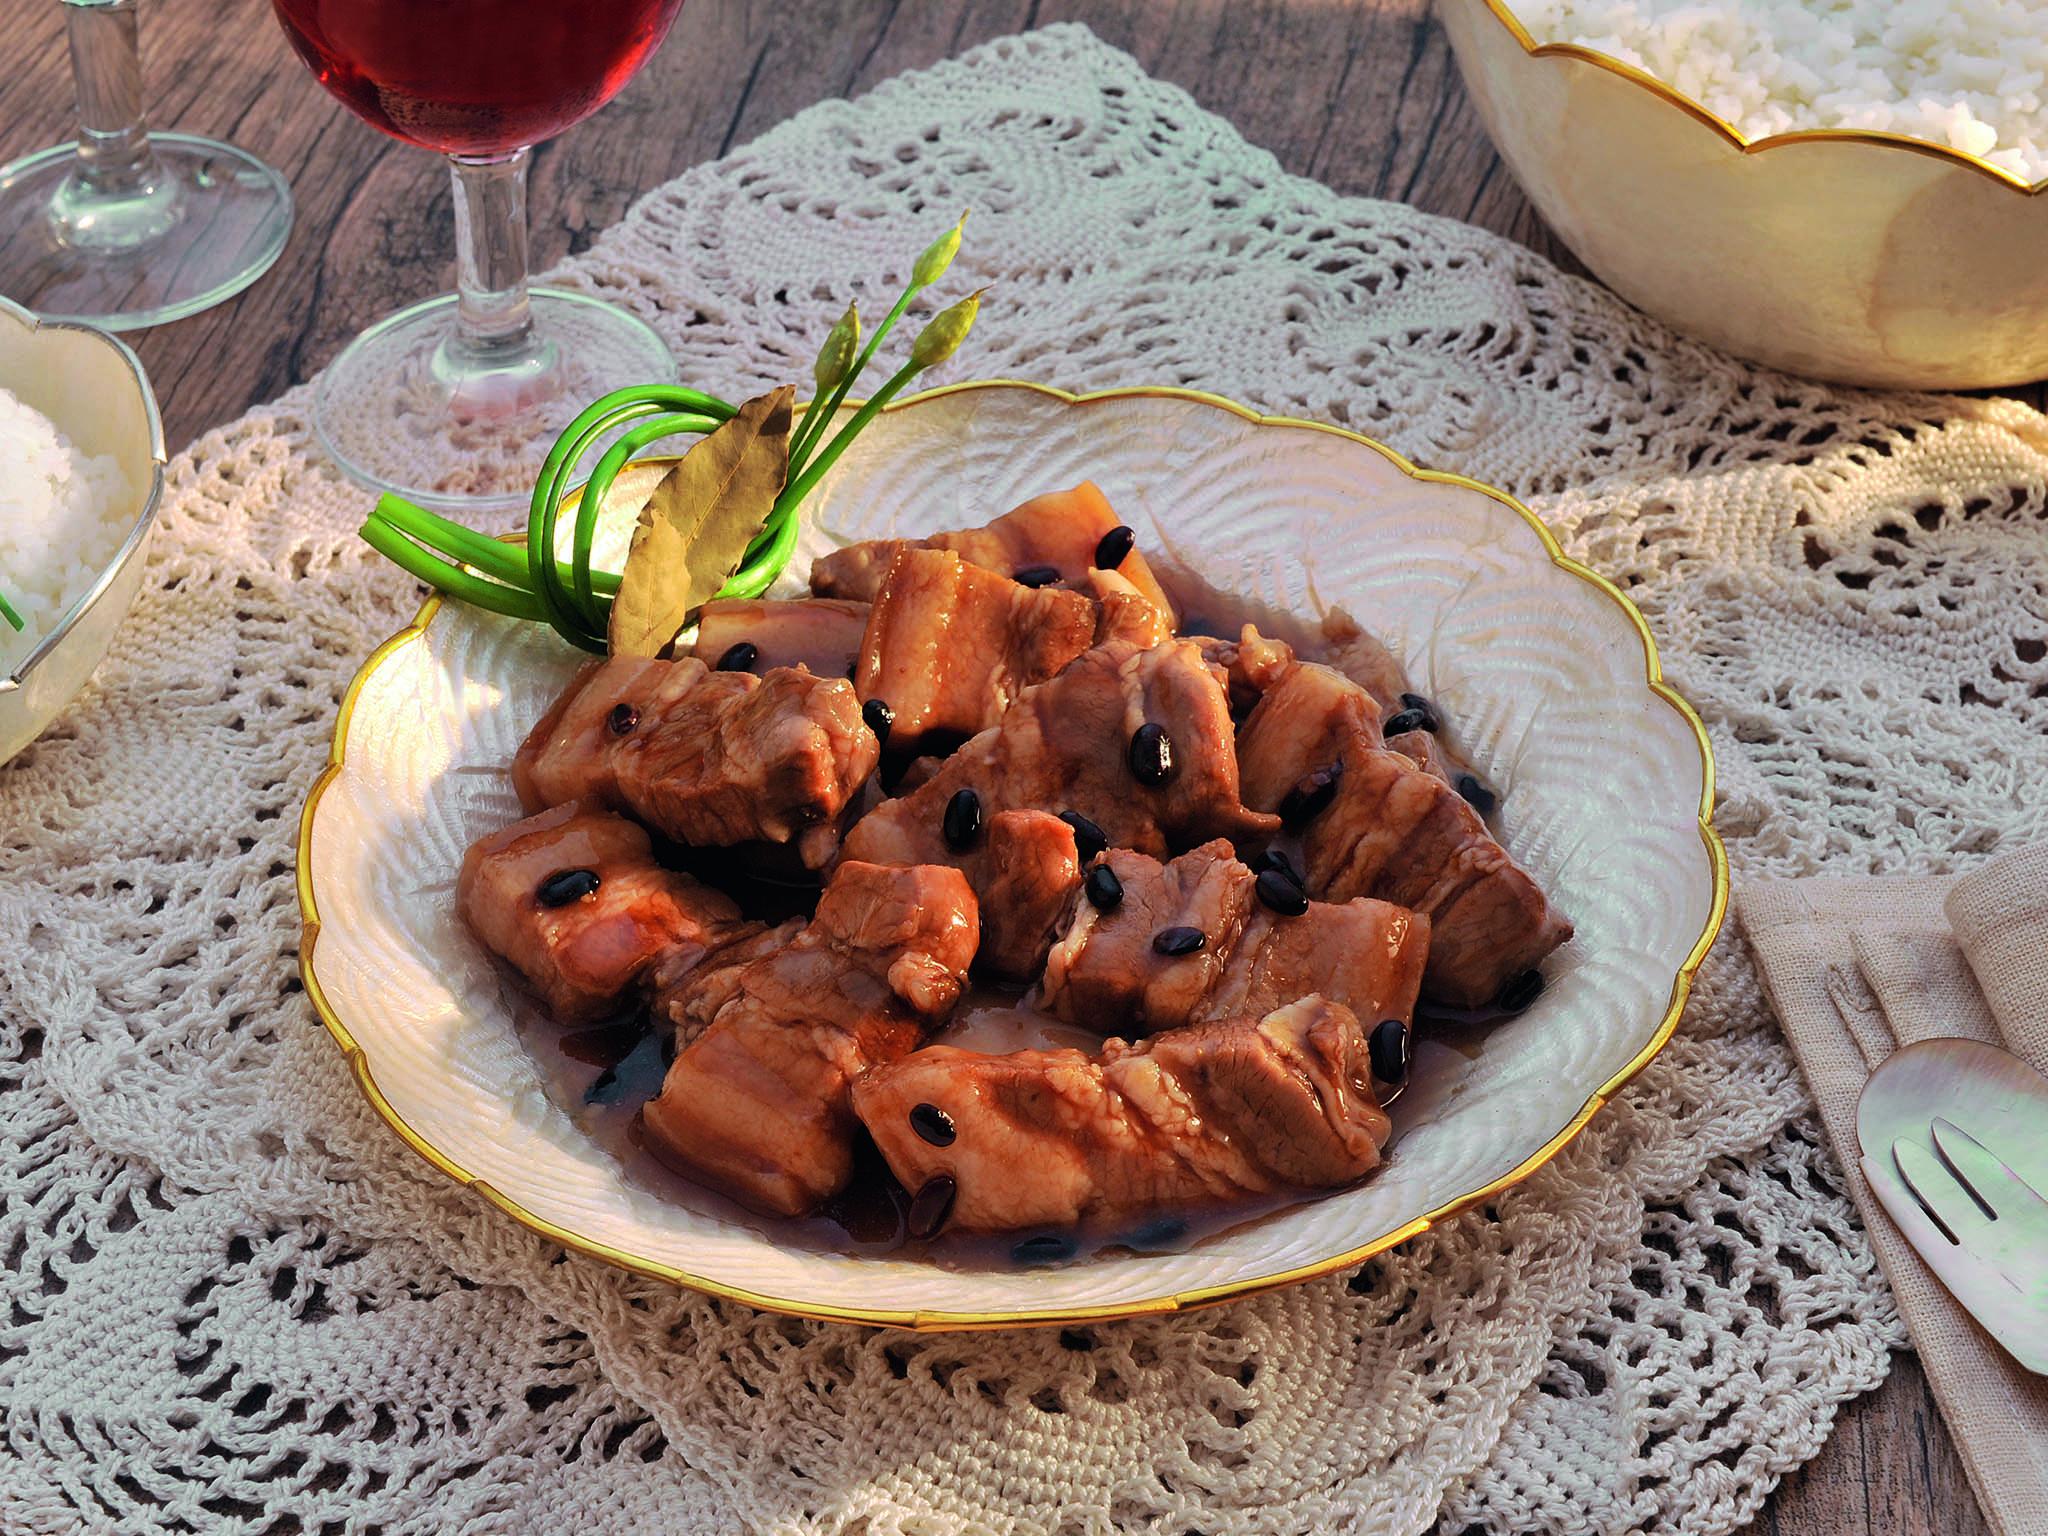 A flavourful marinade is the key to this delicious sweet soy pork dish